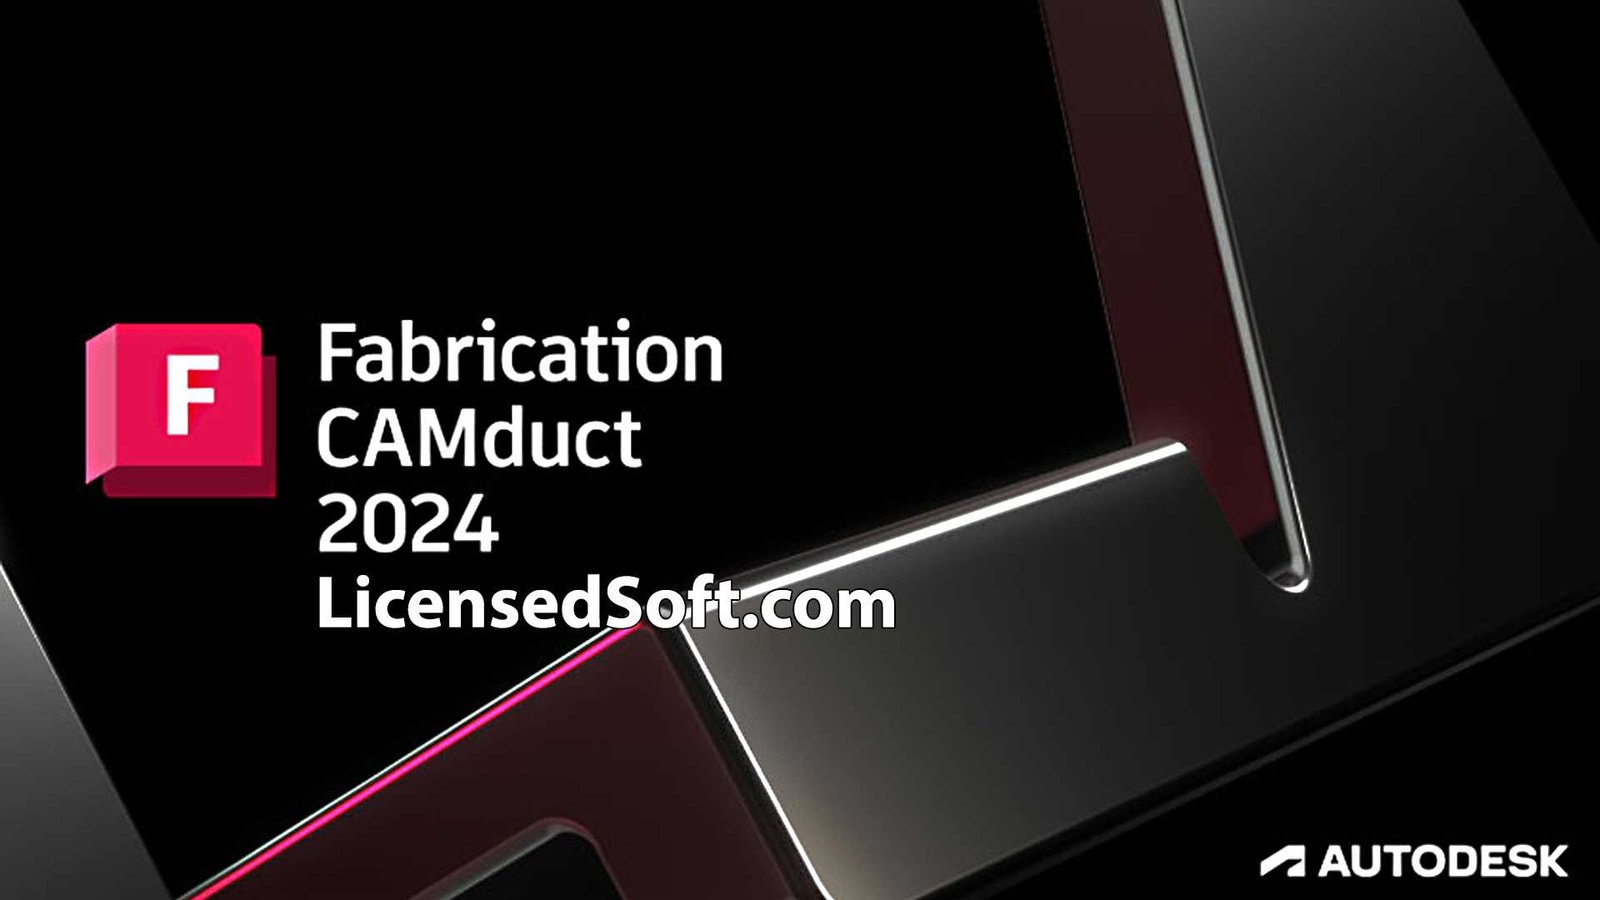 Autodesk Fabrication CAMduct 2024 Lifetime License Cover Image By LicensedSoft